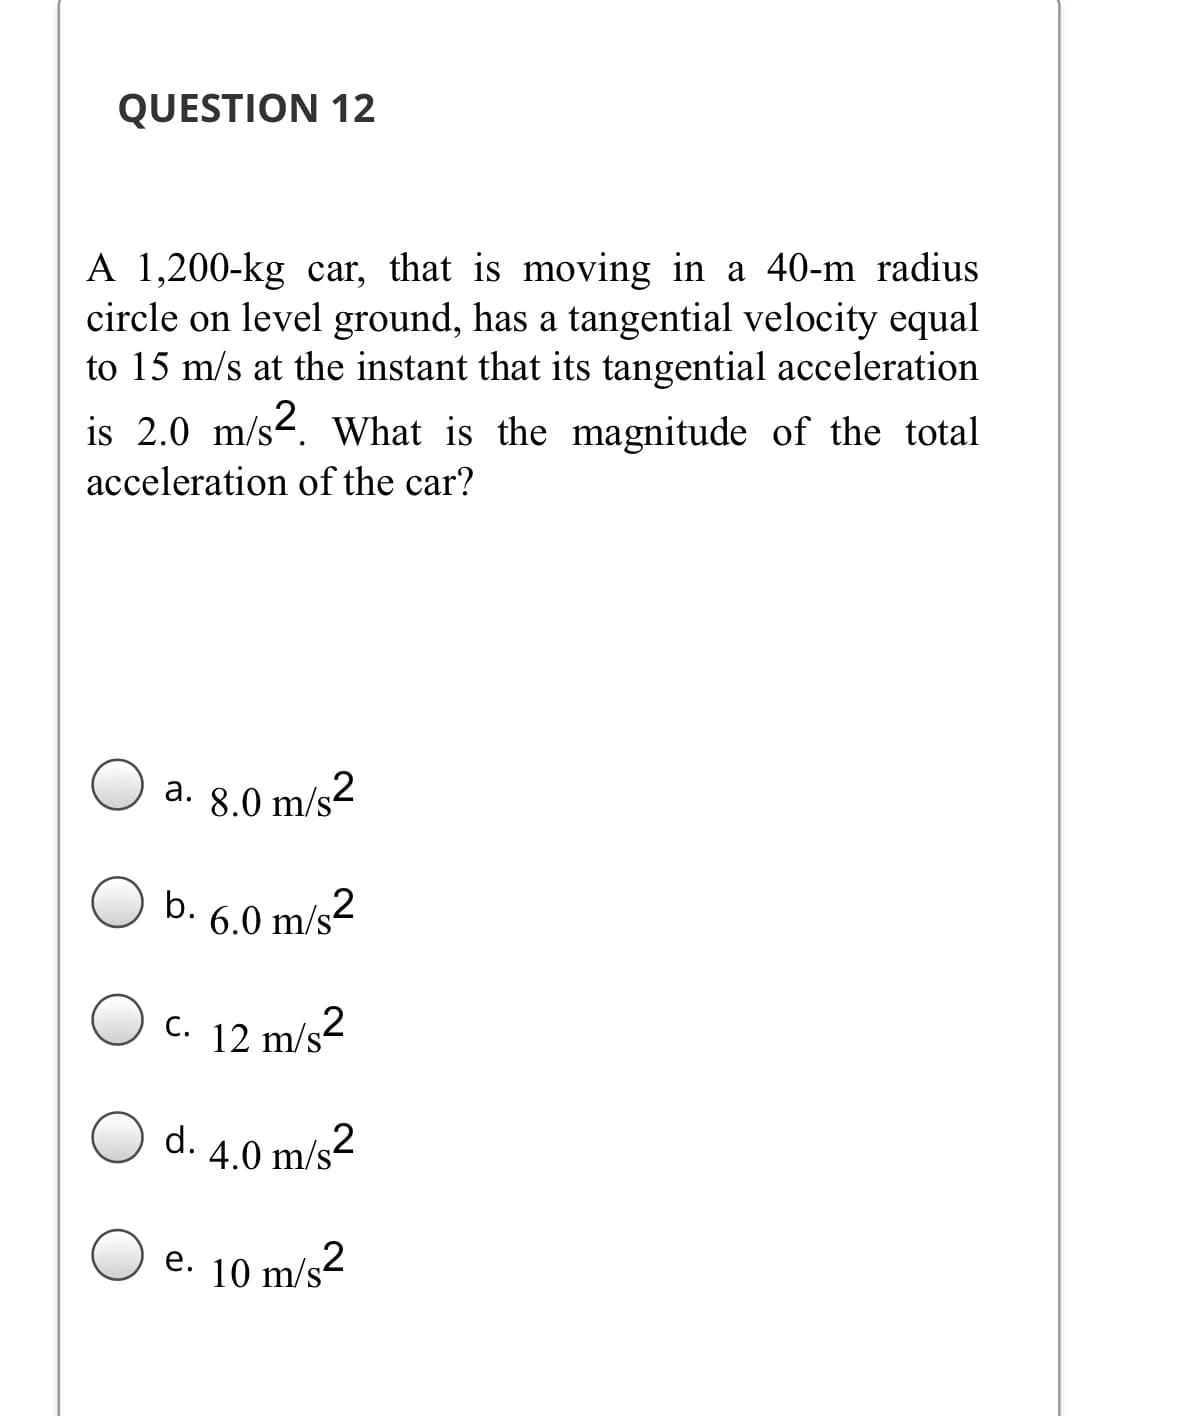 QUESTION 12
A 1,200-kg car, that is moving in a 40-m radius
circle on level ground, has a tangential velocity equal
to 15 m/s at the instant that its tangential acceleration
is 2.0 m/s-. What is the magnitude of the total
acceleration of the car?
a. 8.0 m/s2
а.
b. 6.0 m/s2
c. 12 m/s2
d.
4.0 m/s2
e. 10 m/s2
е.
